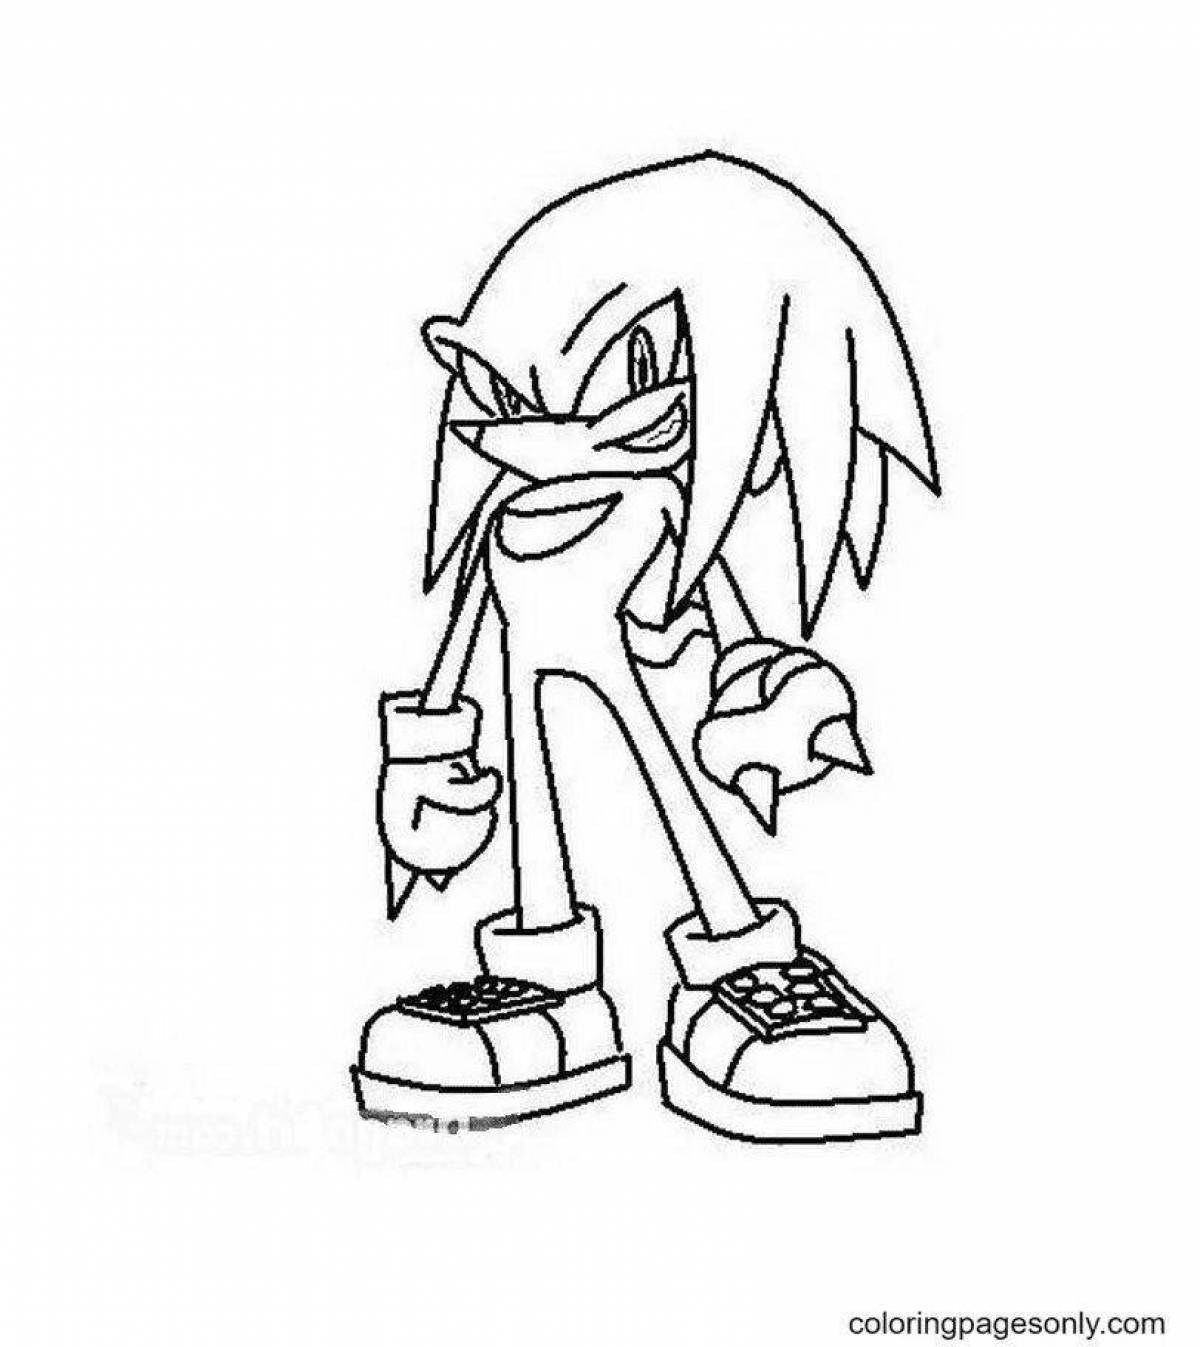 Radiant coloring page sonic knuckles